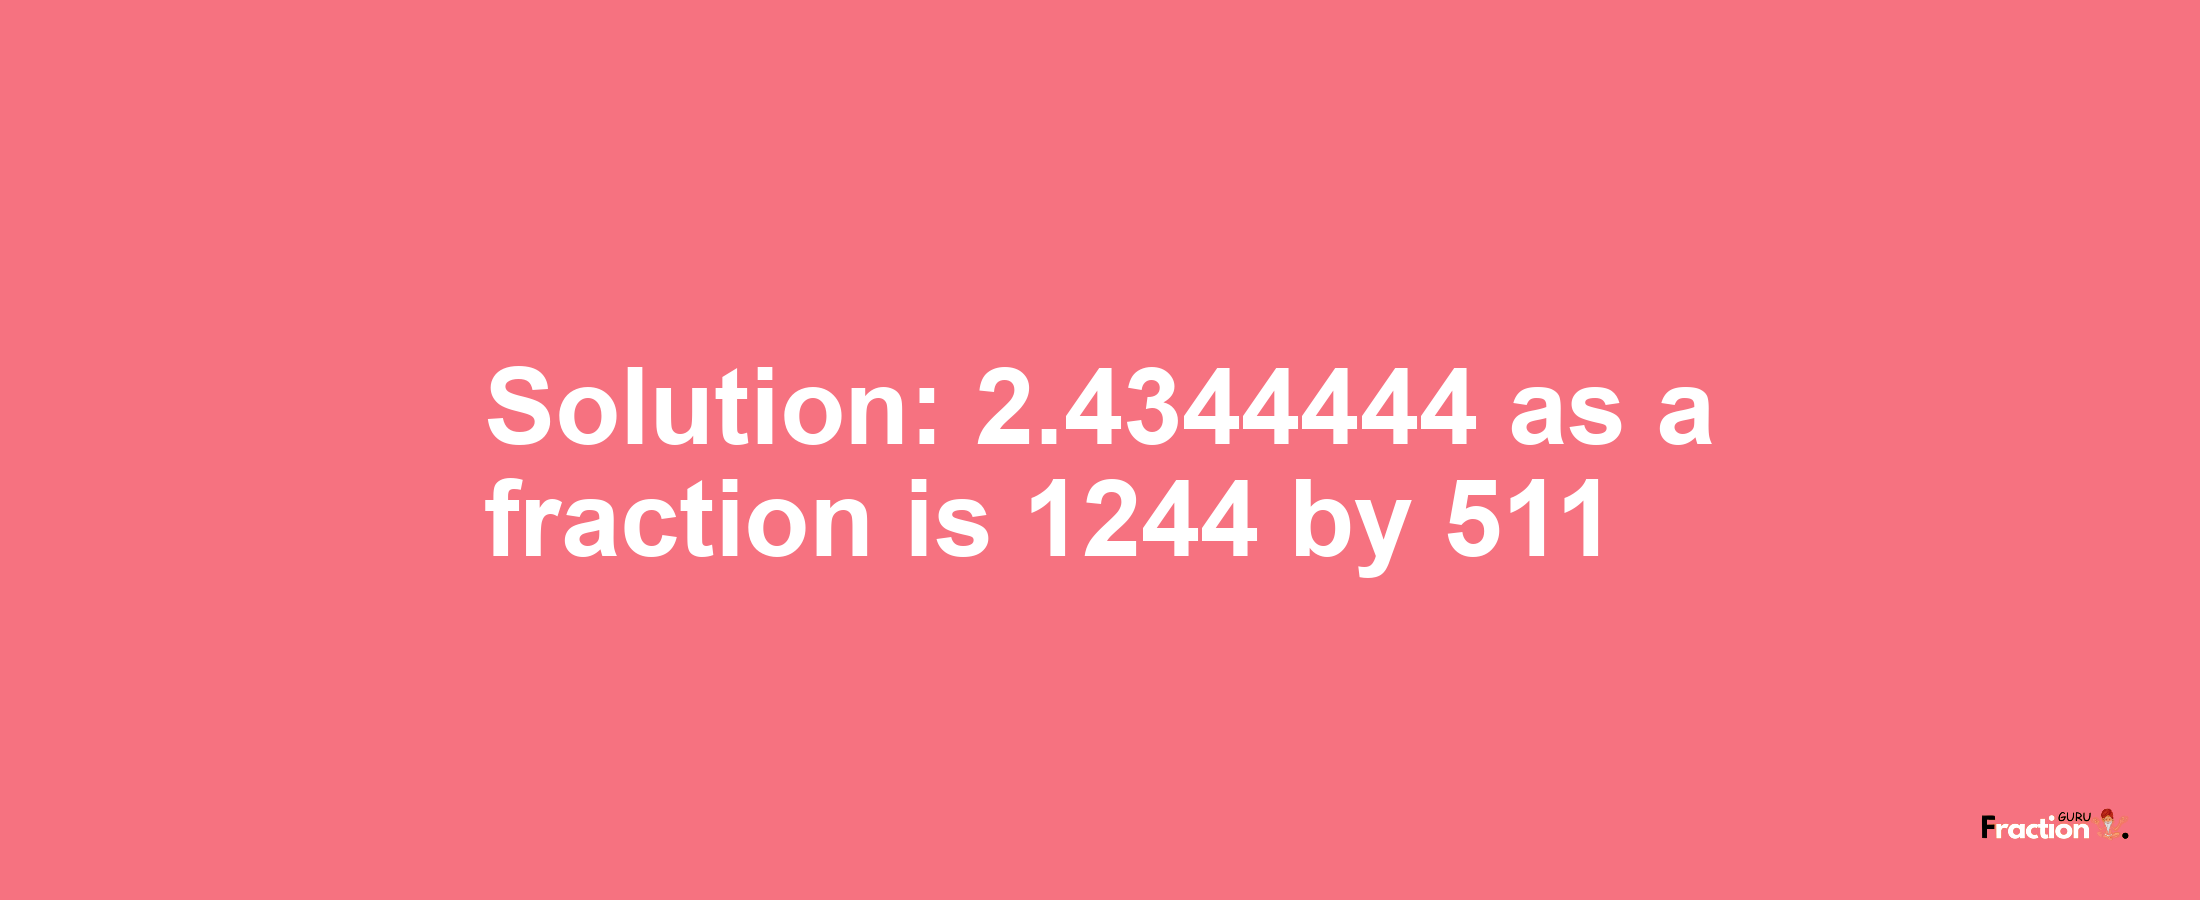 Solution:2.4344444 as a fraction is 1244/511